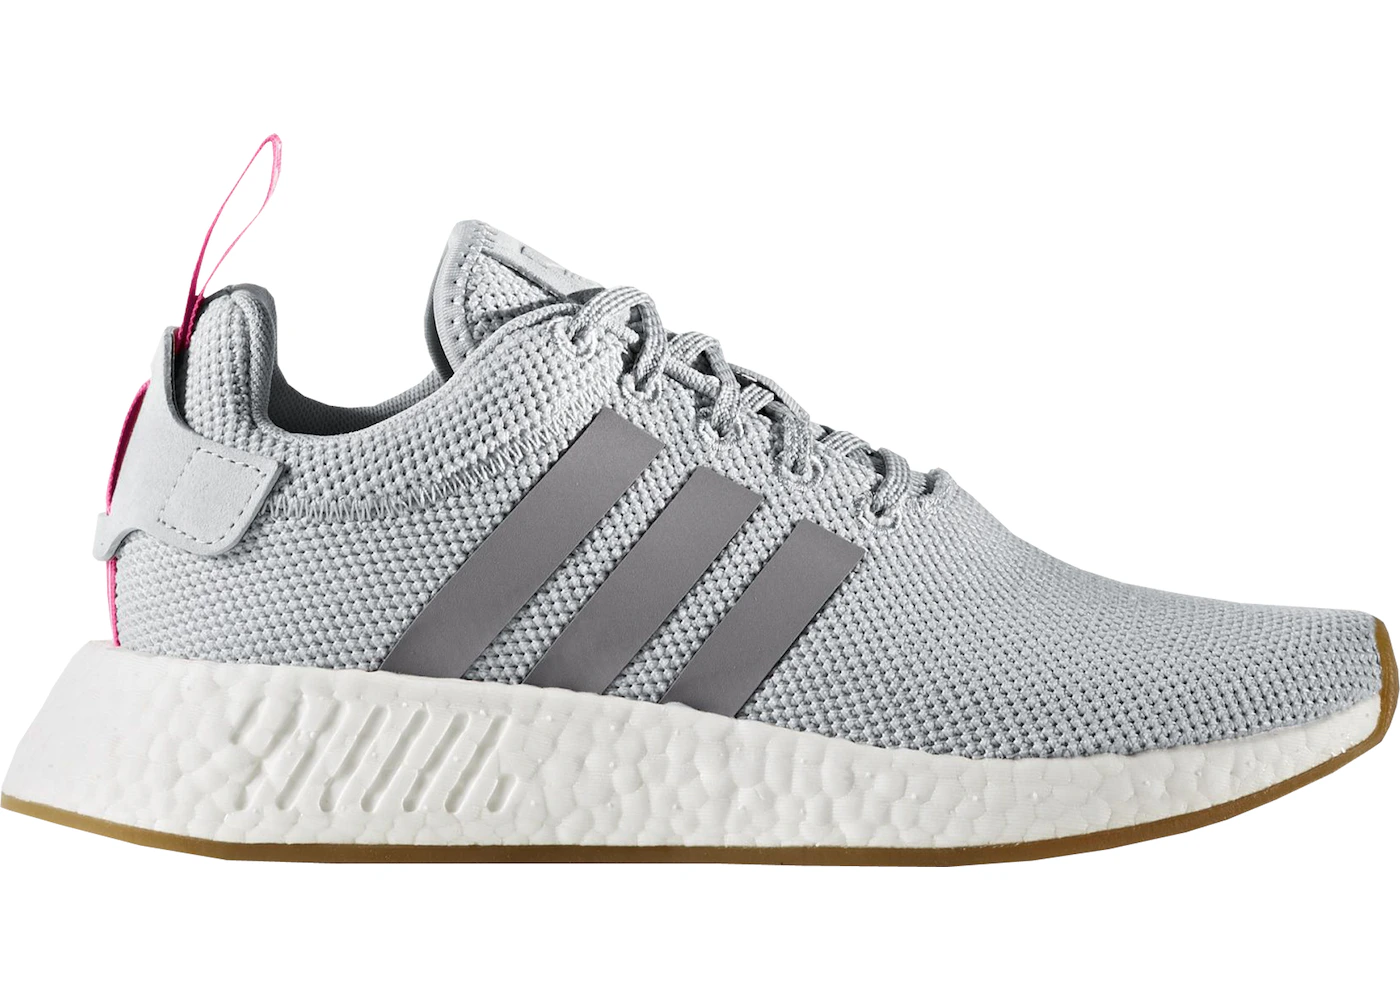 adidas R2 Grey Shock Pink (Women's) BY9317 US